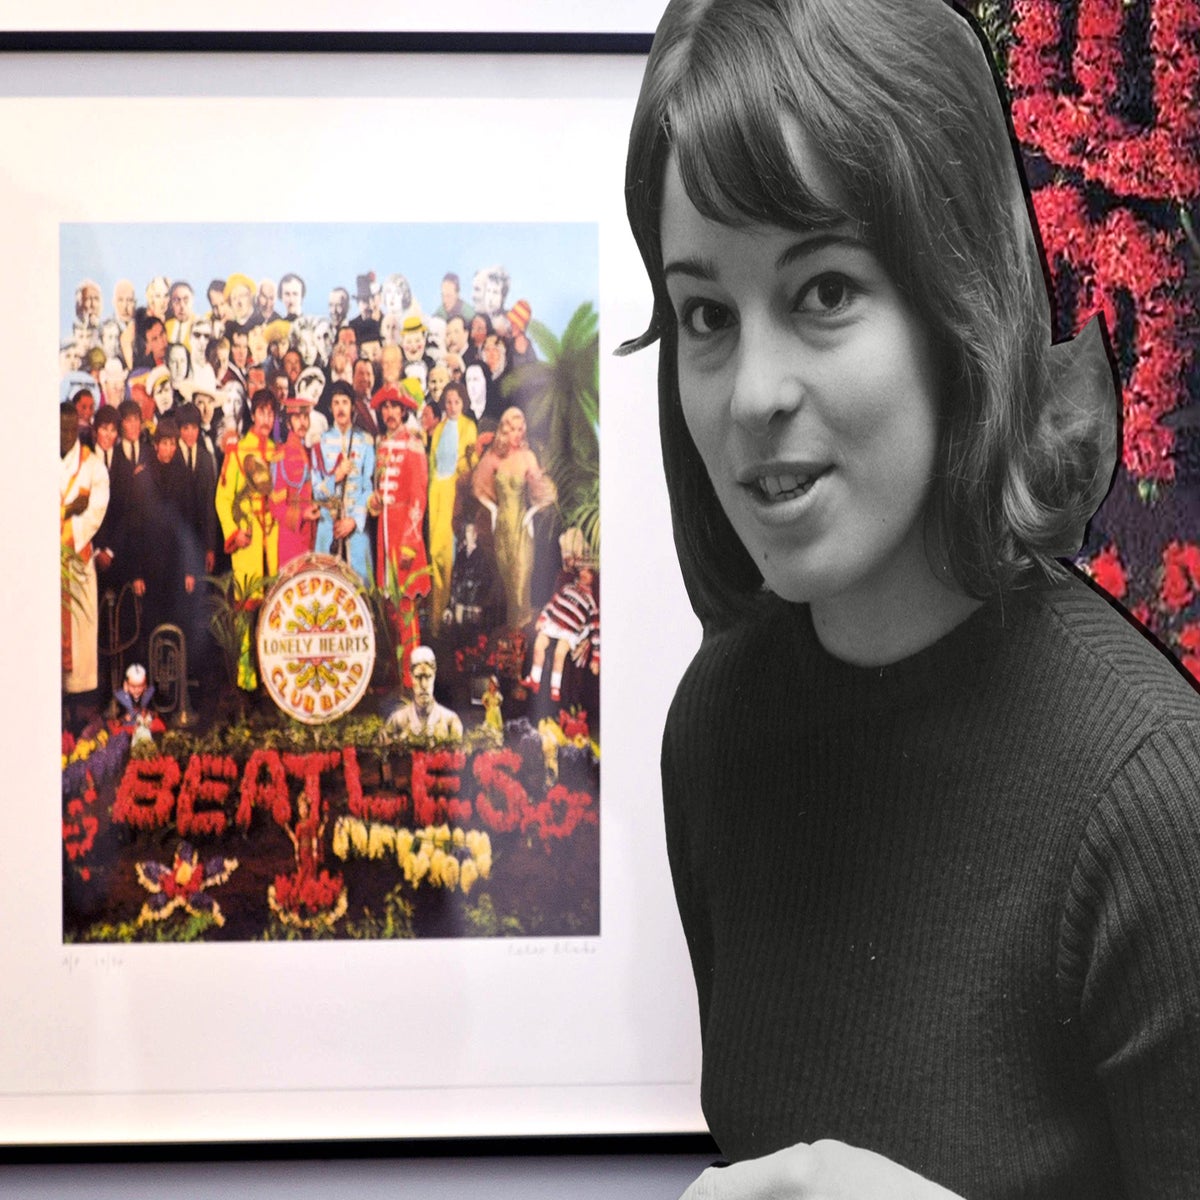 Who's Who On The Sgt. Pepper's Lonely Hearts Club Band Album Cover